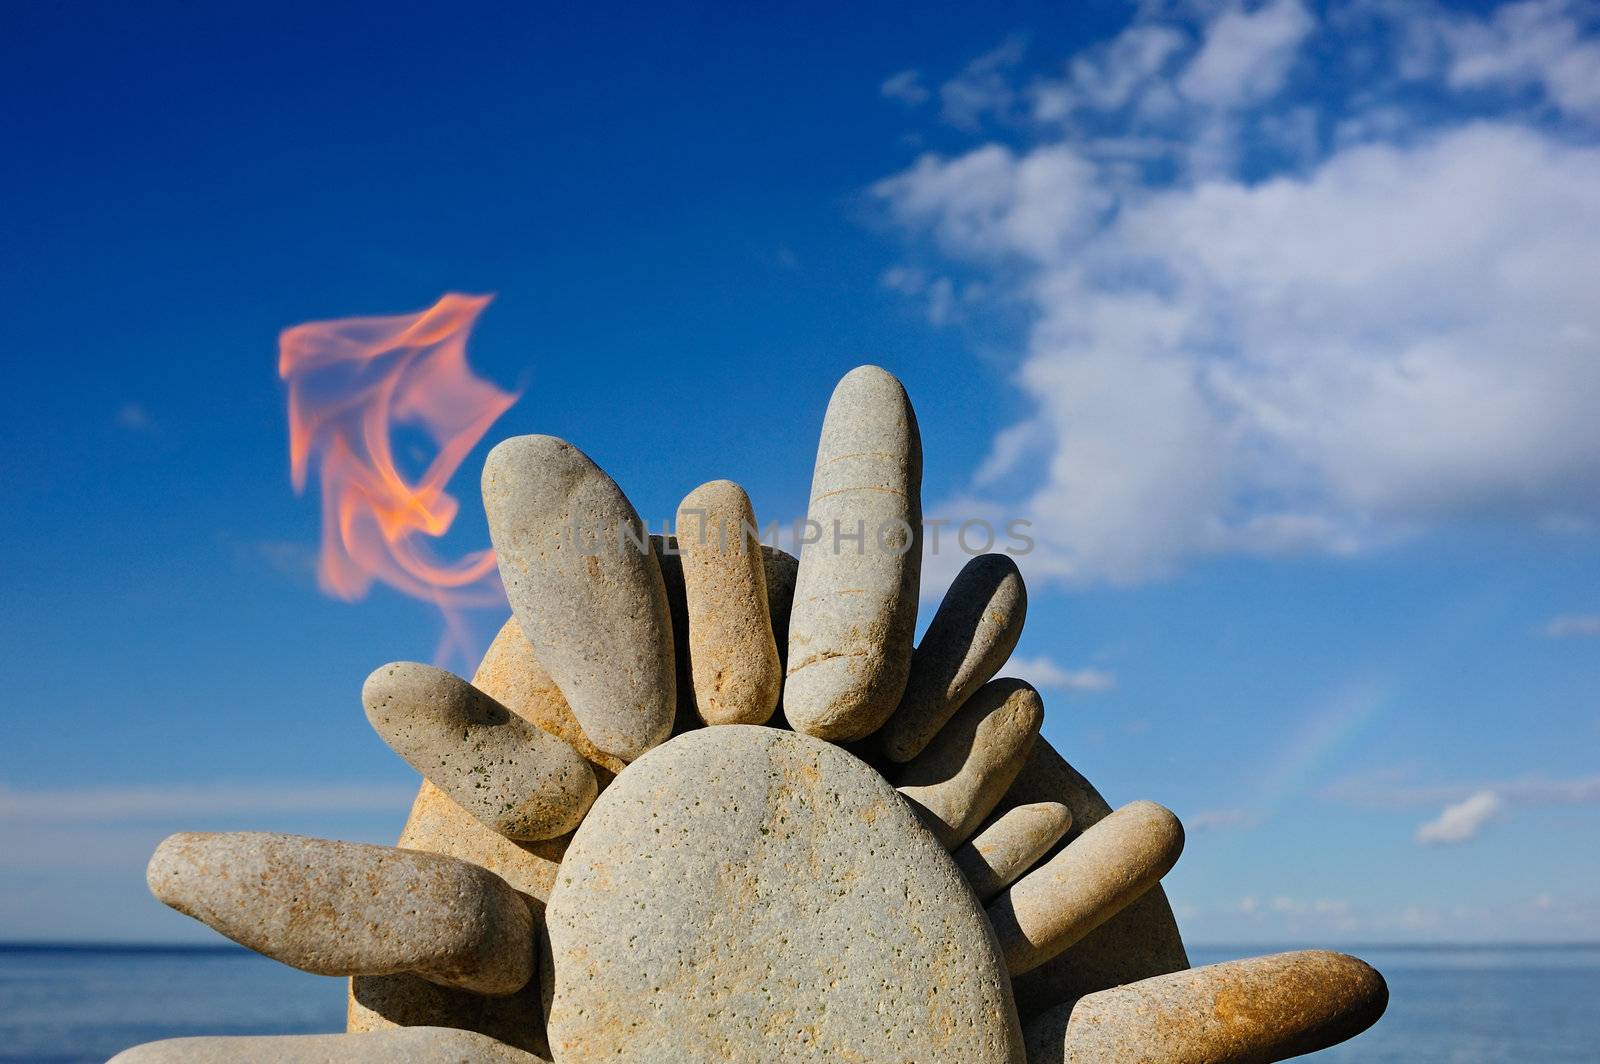 Symbol of the Sun with flames on stone